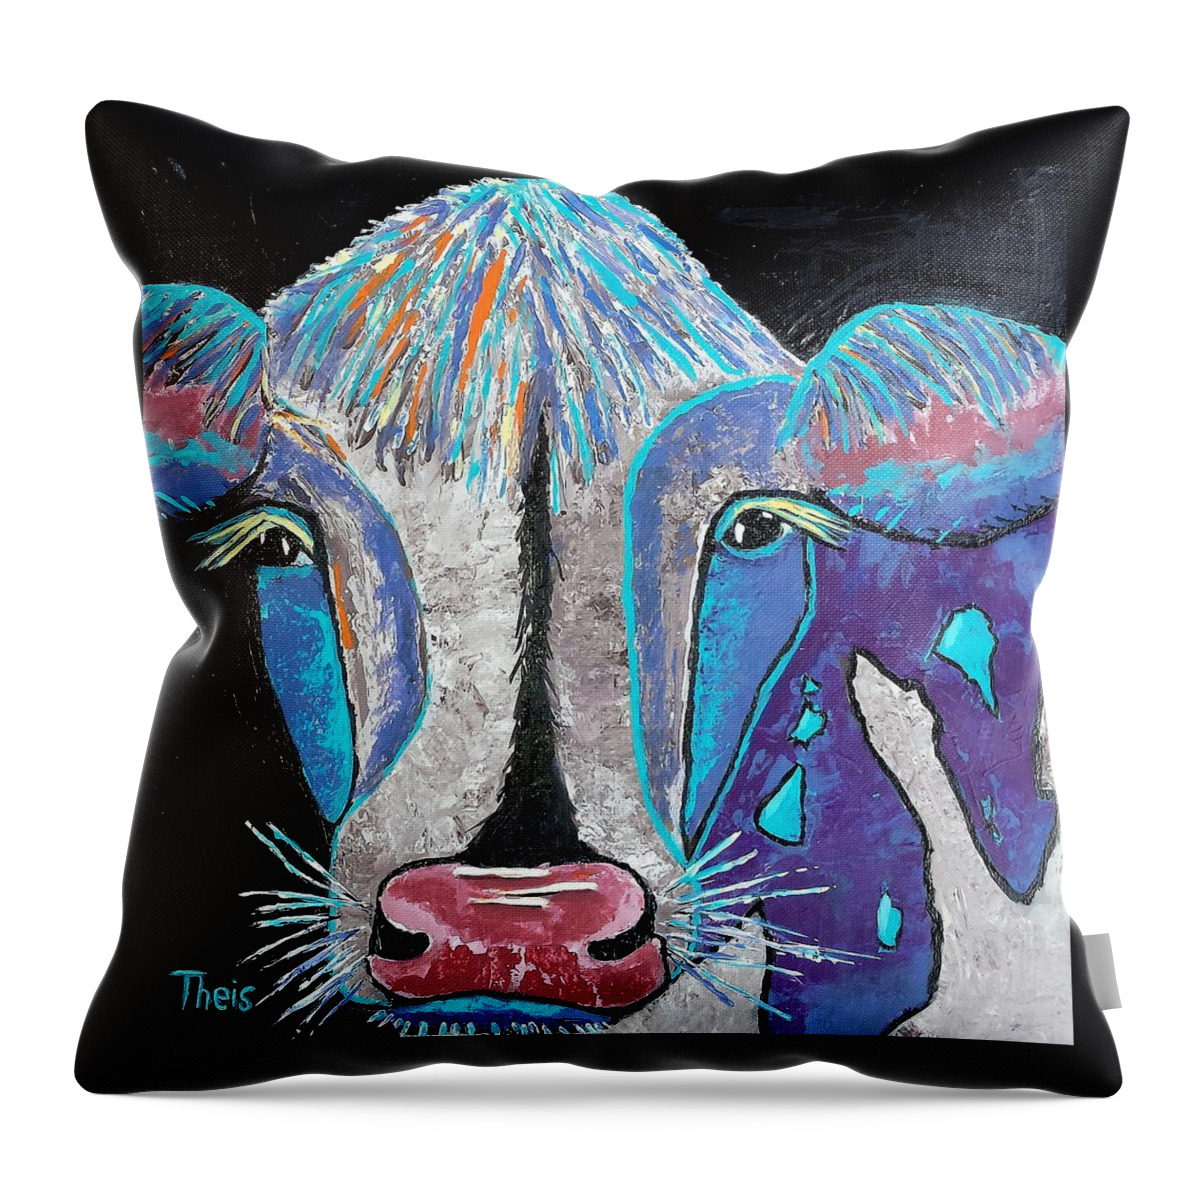 Cows Throw Pillow featuring the painting My Wild Side by Suzanne Theis